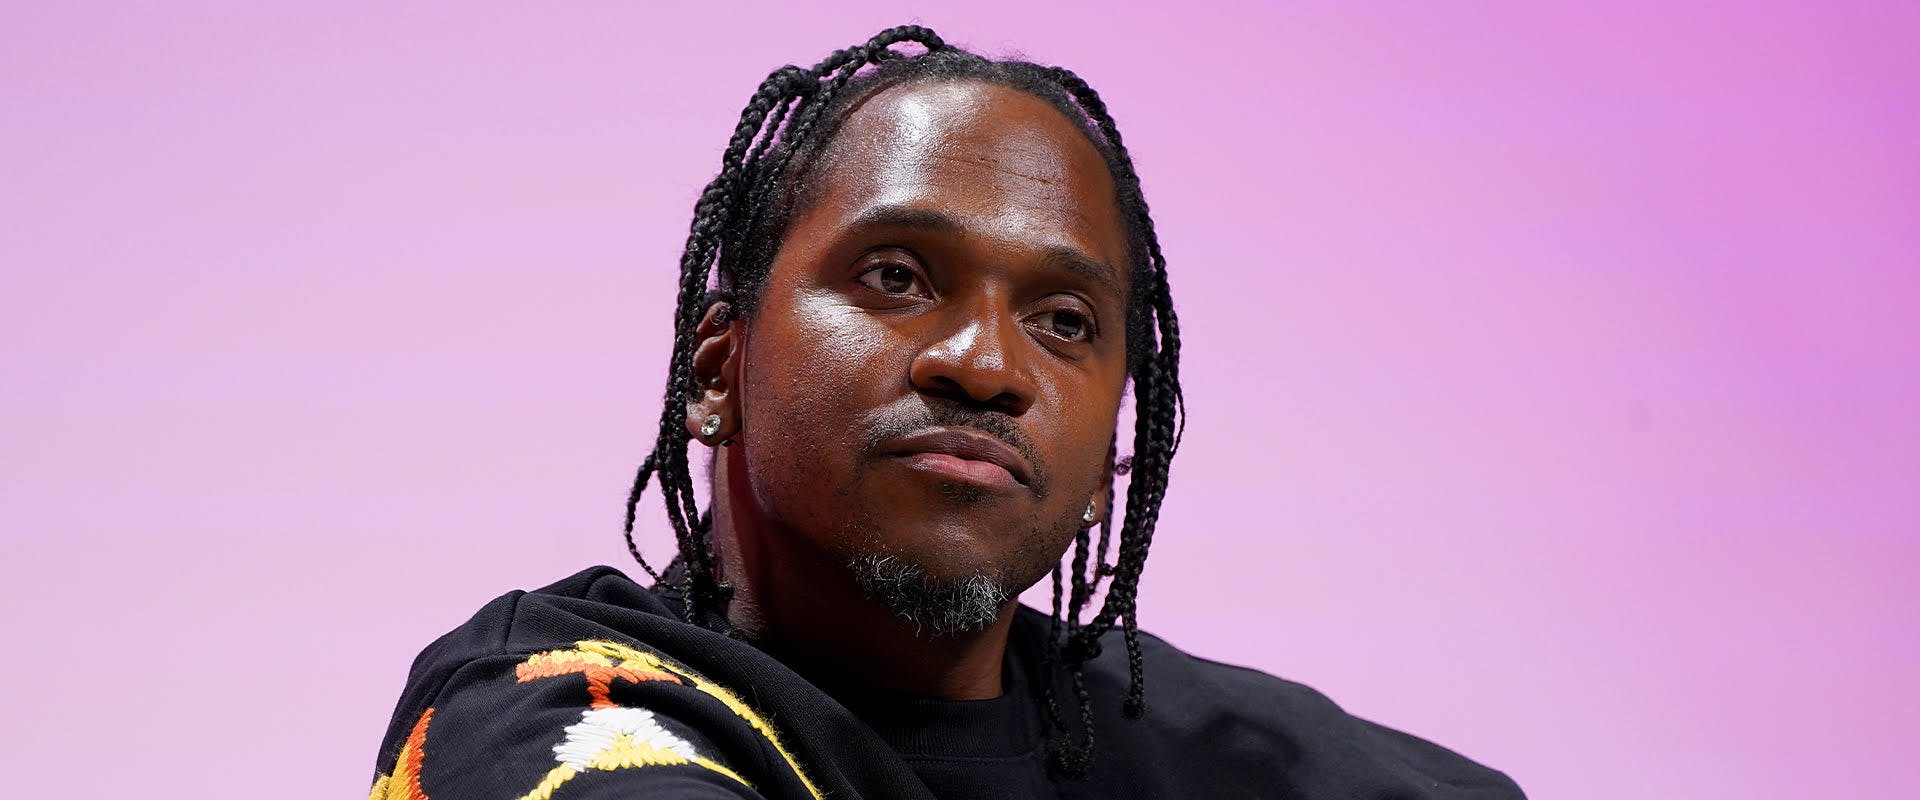 Pusha T speaks onstage during Panel 2: "Who We Are Now" as Pharrell Williams holds forum at Norfolk State University to discuss full potential of the cities of Virginia Beach and Norfolk in his home state of Virginia at Norfolk State University on October 28, 2021 in Norfolk, Virginia. (Photo by Leigh Vogel/Getty Images for Pharrell Williams )